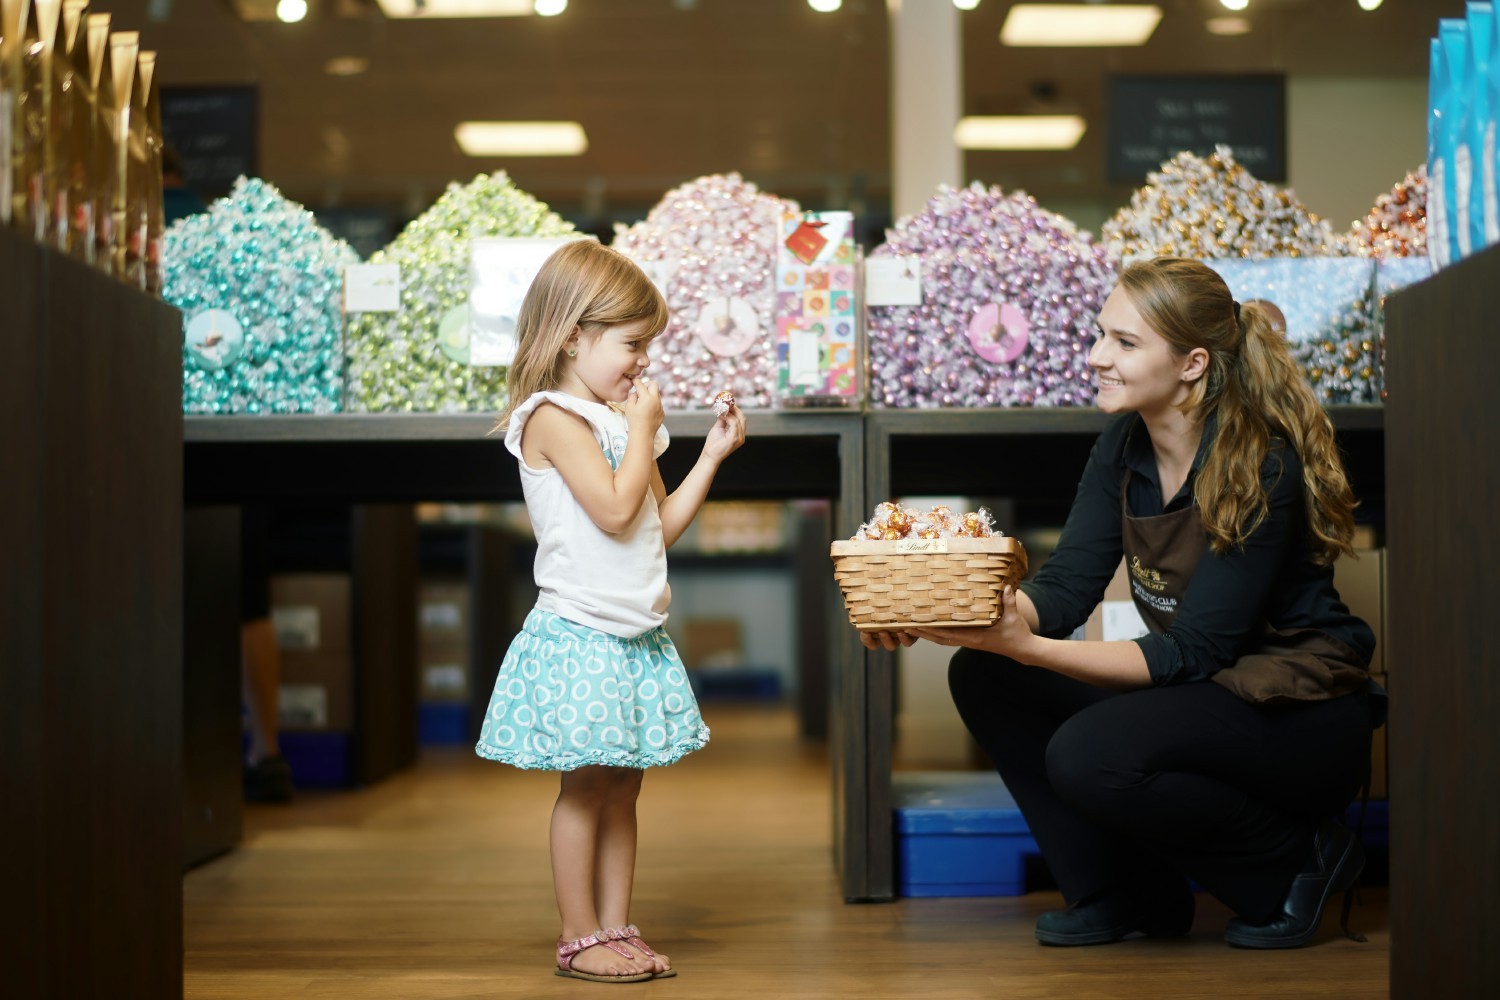 Offering hundreds of exquisite products, our Lindt retail stores help to 